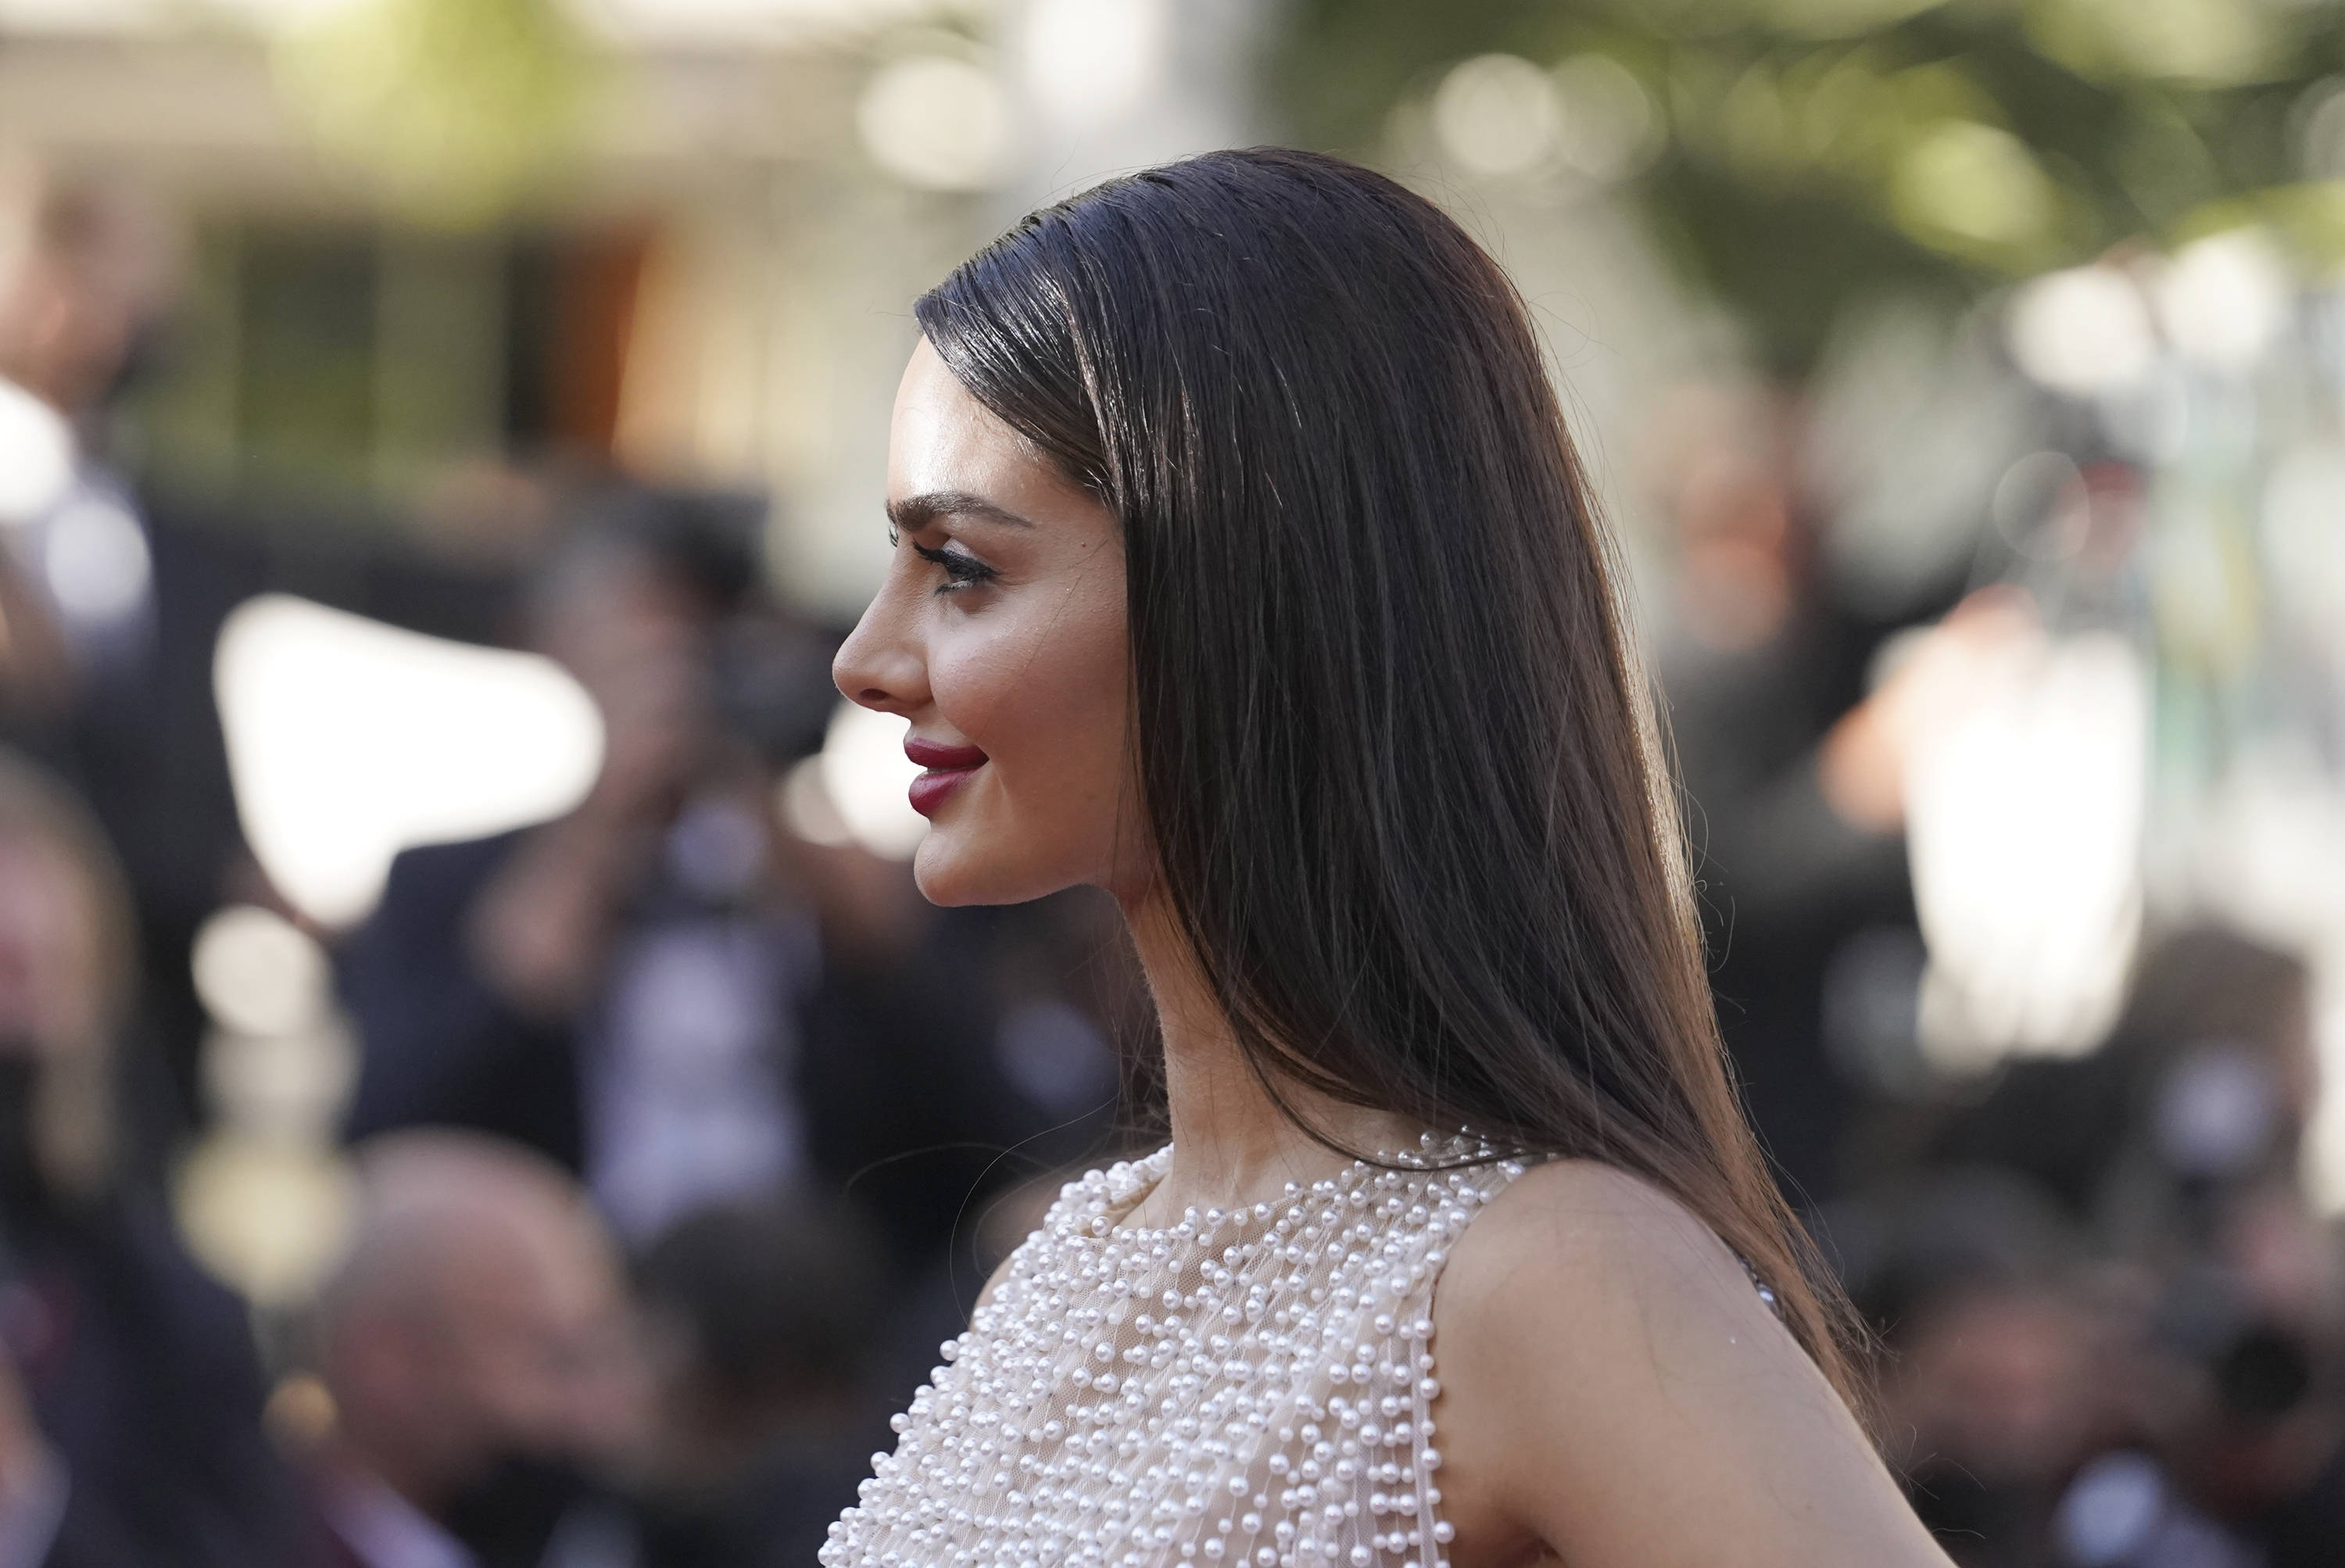 Mahlagha Jaberi at the premiere of "Aline" during the Cannes Film Festival 